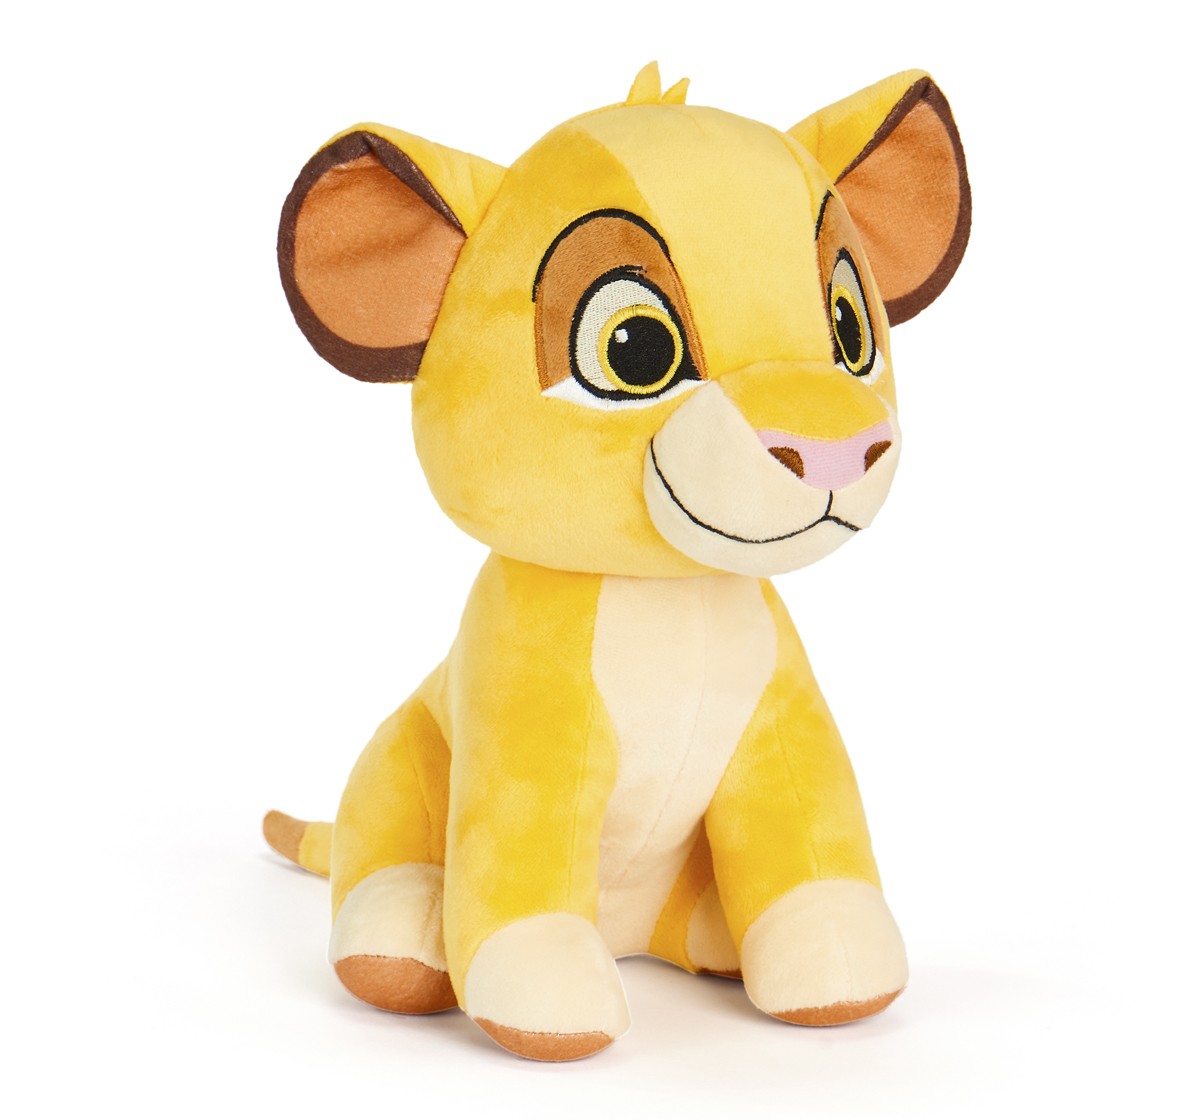 Disney Classic Simba 9 Inch Soft Toy for Kids, Multicolor 2Y+